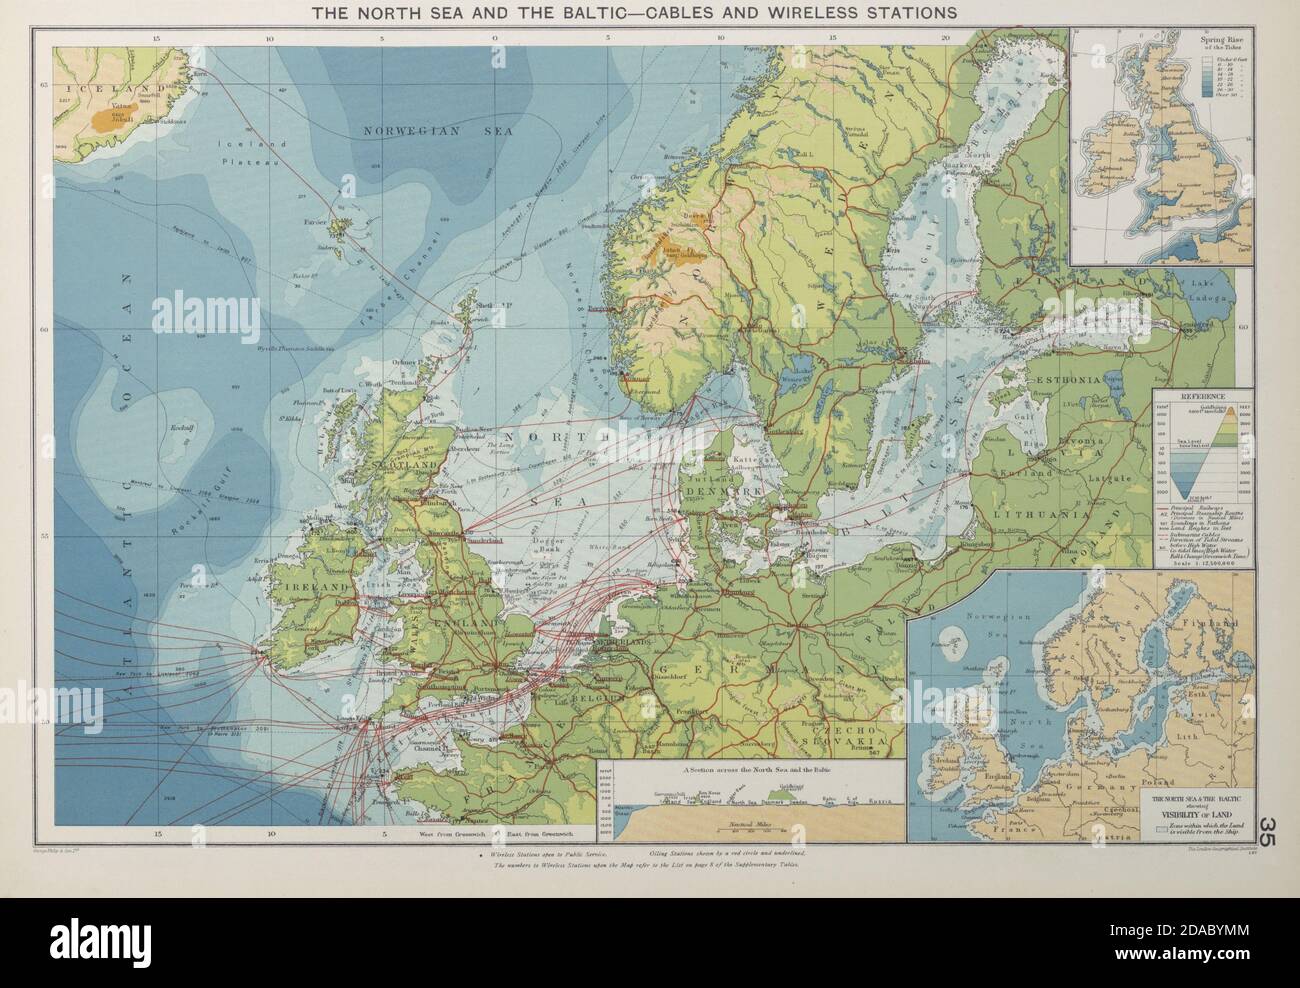 North Sea Baltic Cable Wireless Stations Land visibility Shipping lines 1927 map Stock Photo